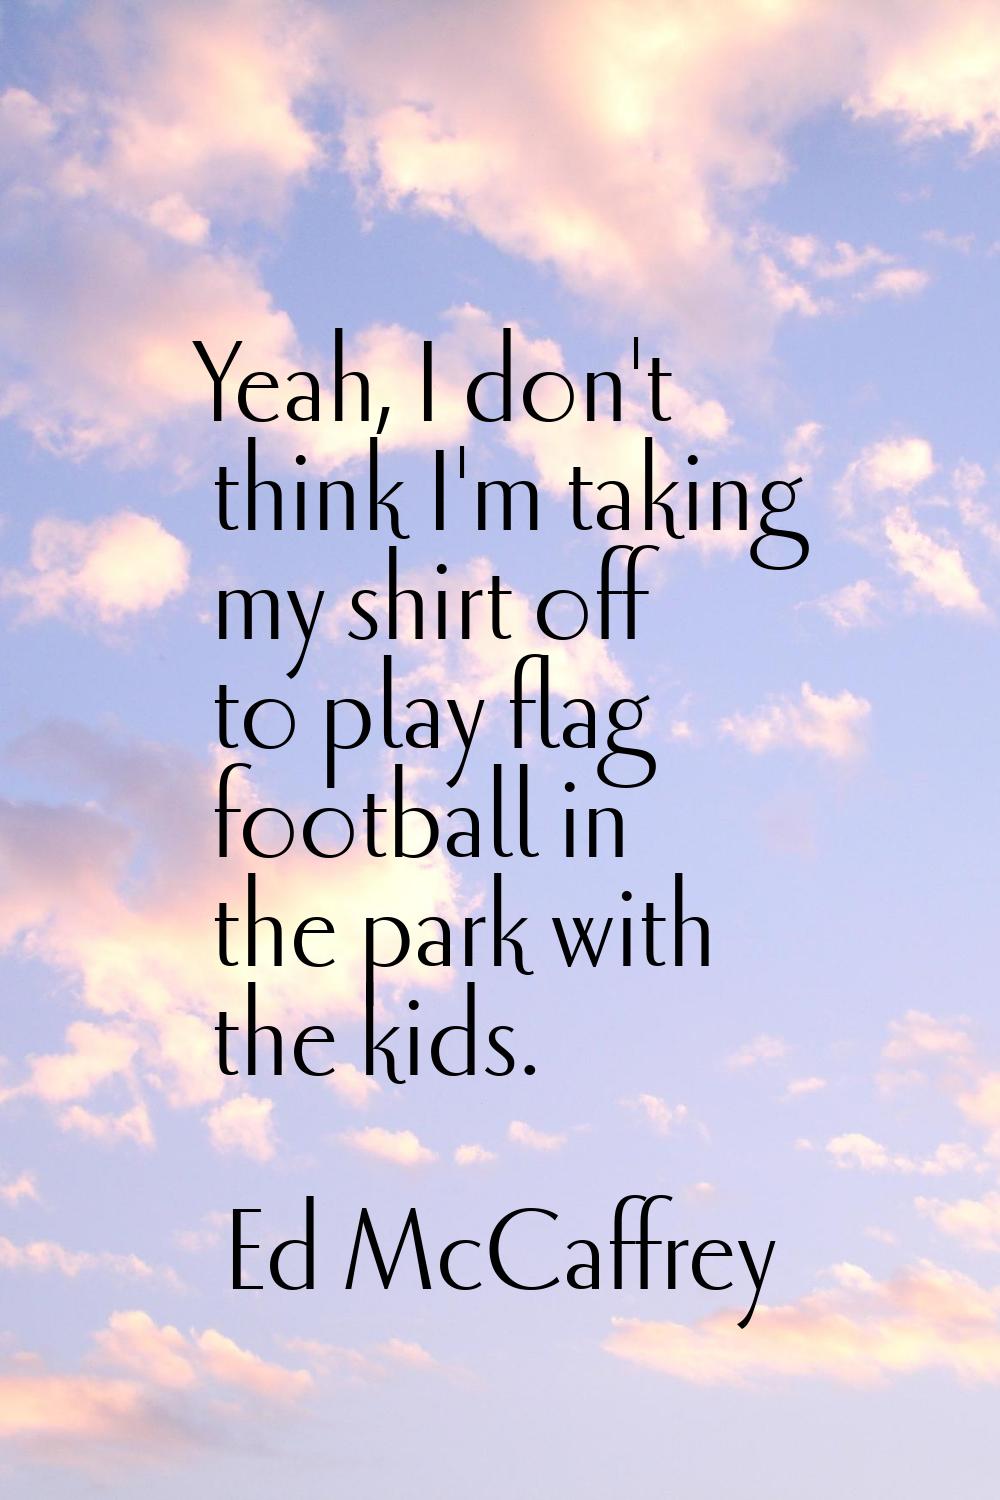 Yeah, I don't think I'm taking my shirt off to play flag football in the park with the kids.